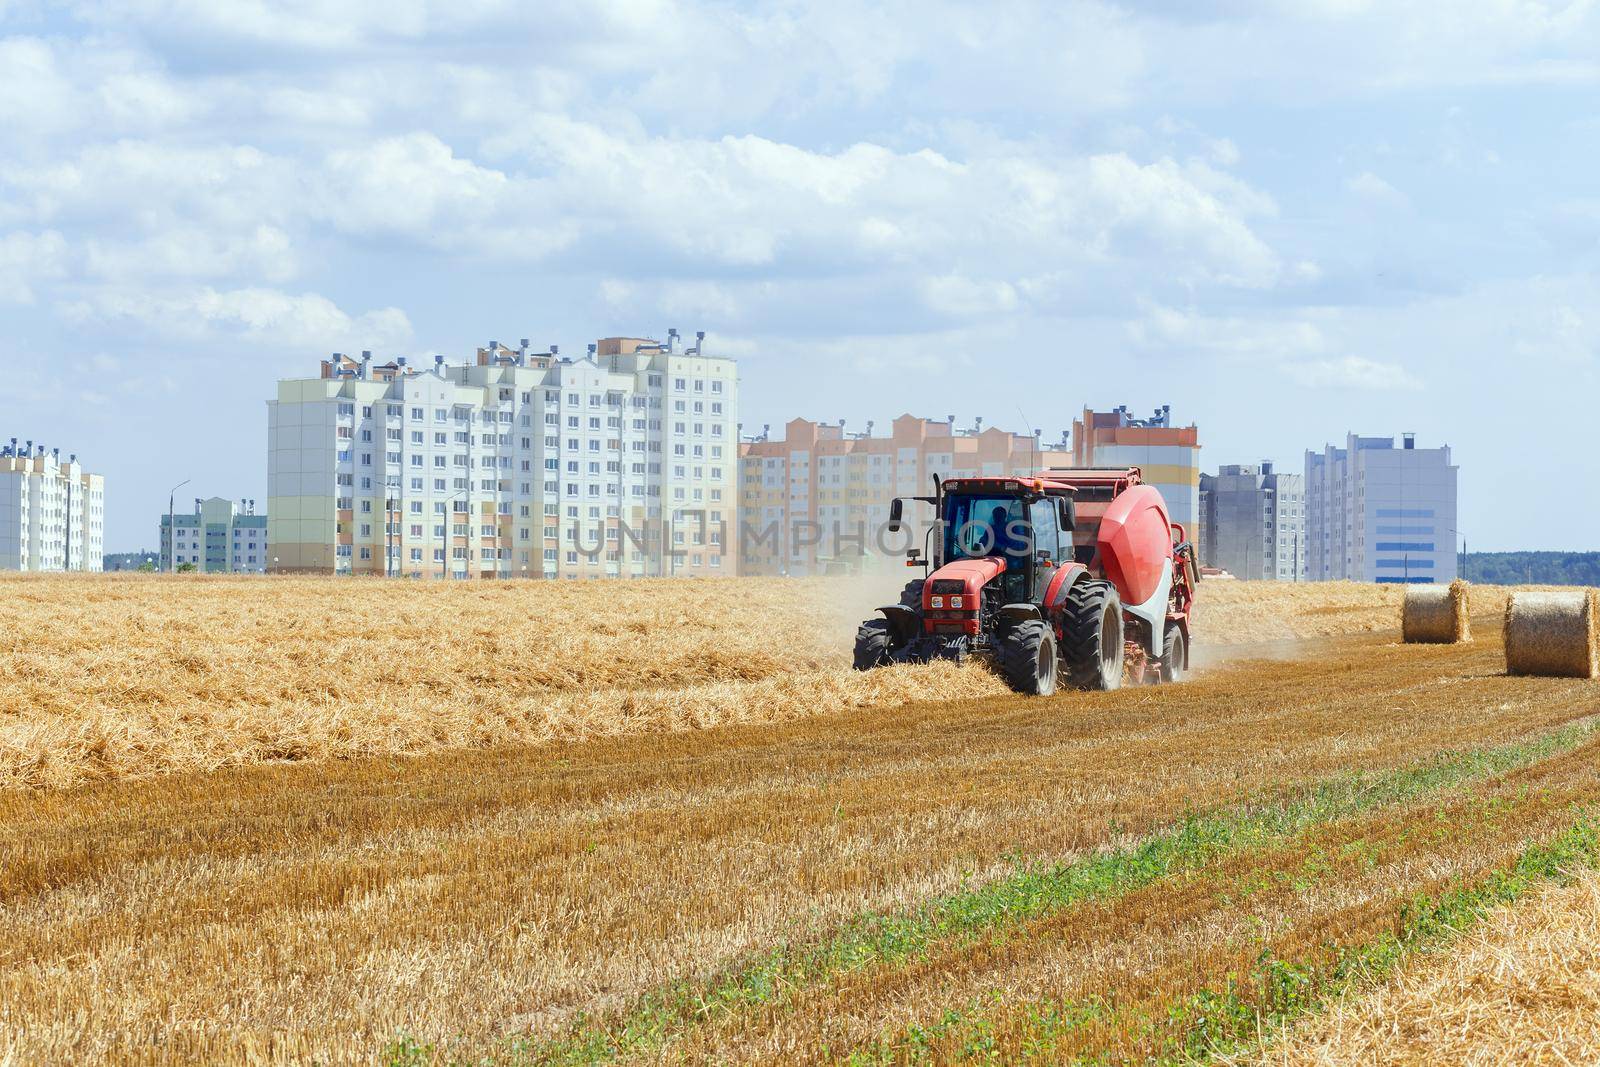 A round baler discharges a fresh wheat bale during harvesting.